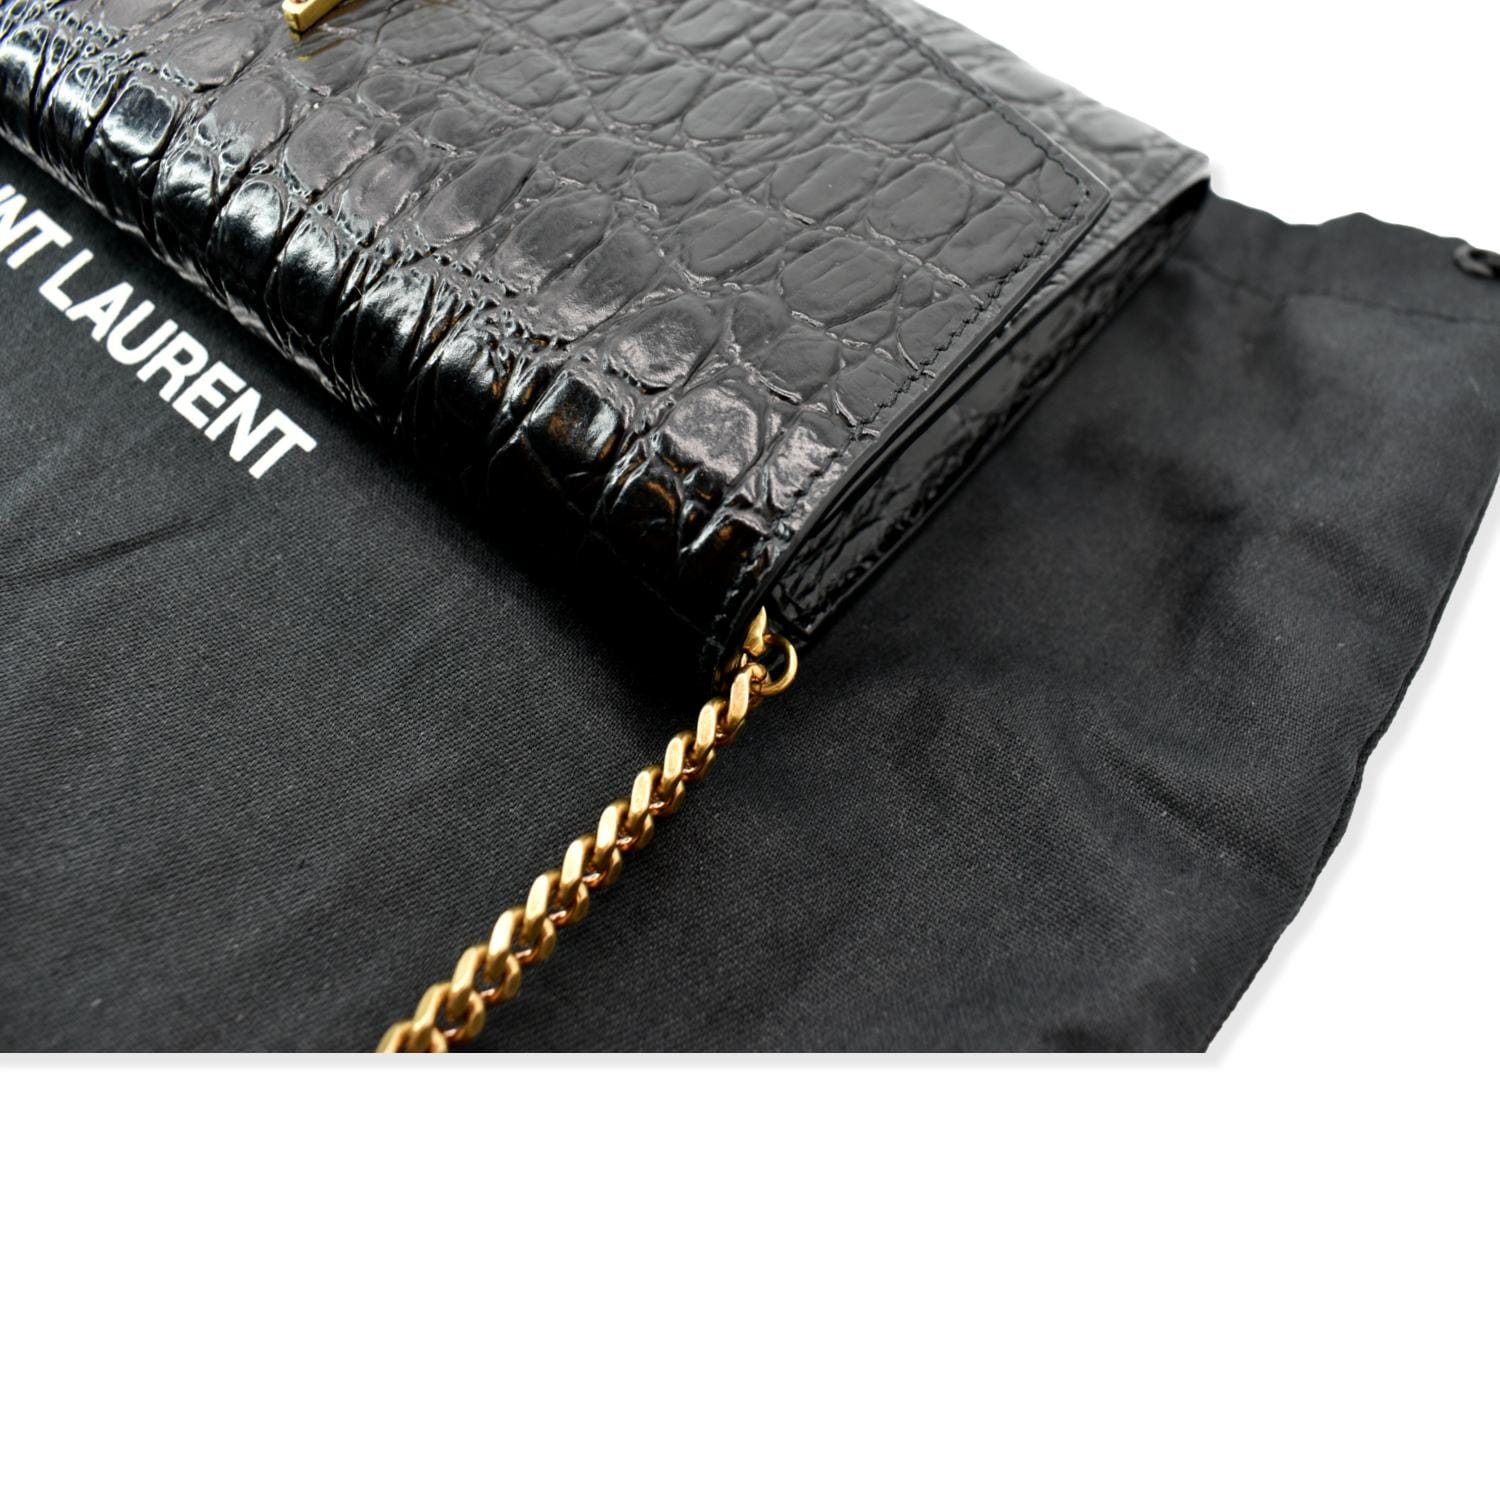 🇲🇾YSL So Black Wallet On Chain, Gallery posted by DM Luxshop